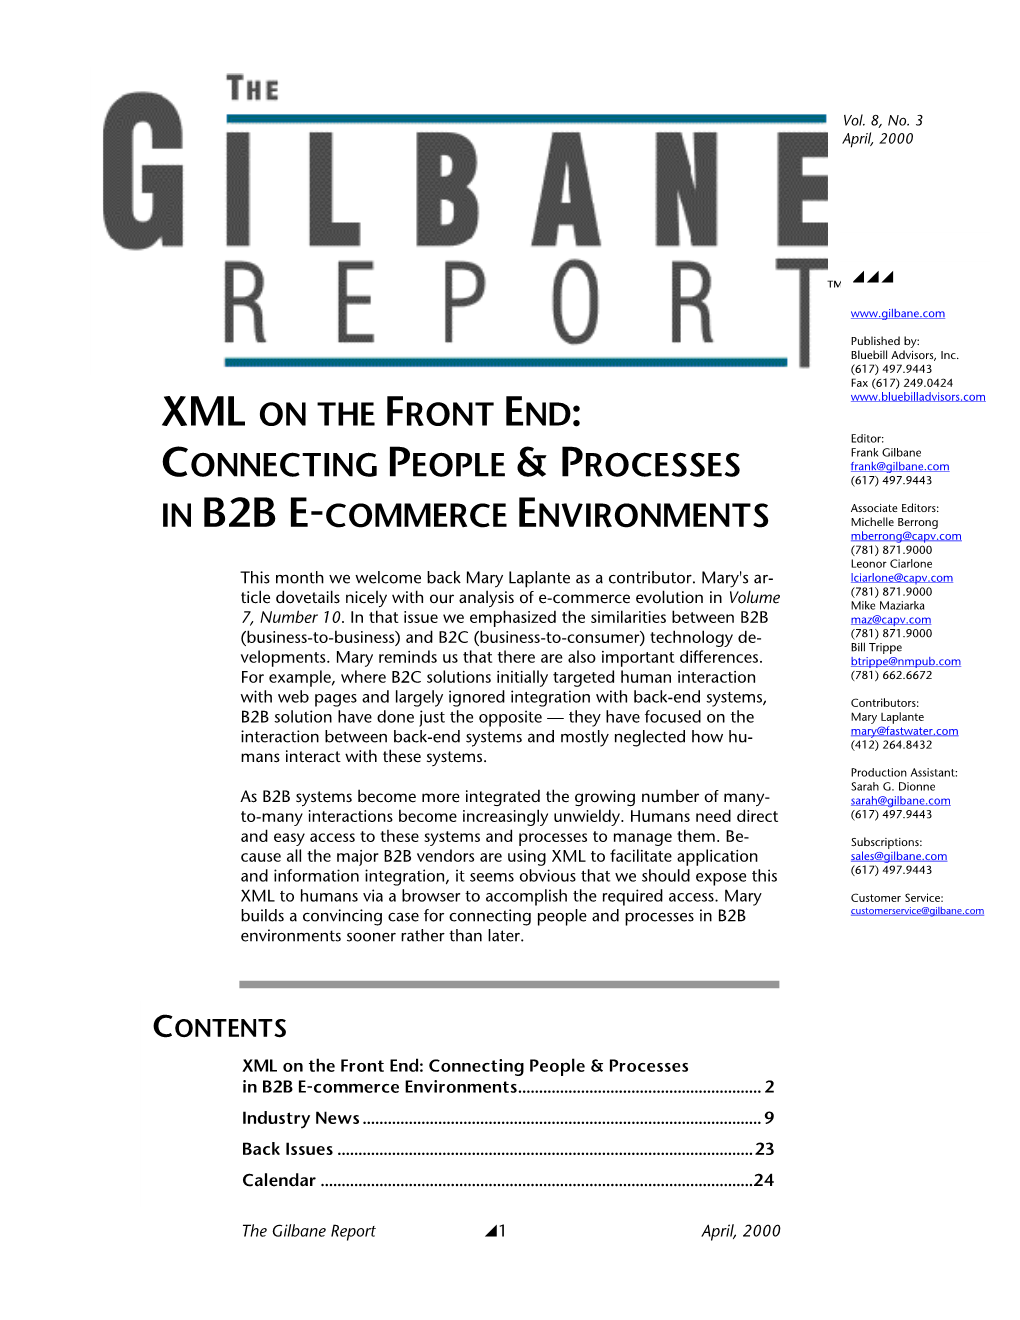 XML on the Front End: Connecting People & Processes in B2B E-Commerce... Vol 8 Num 3